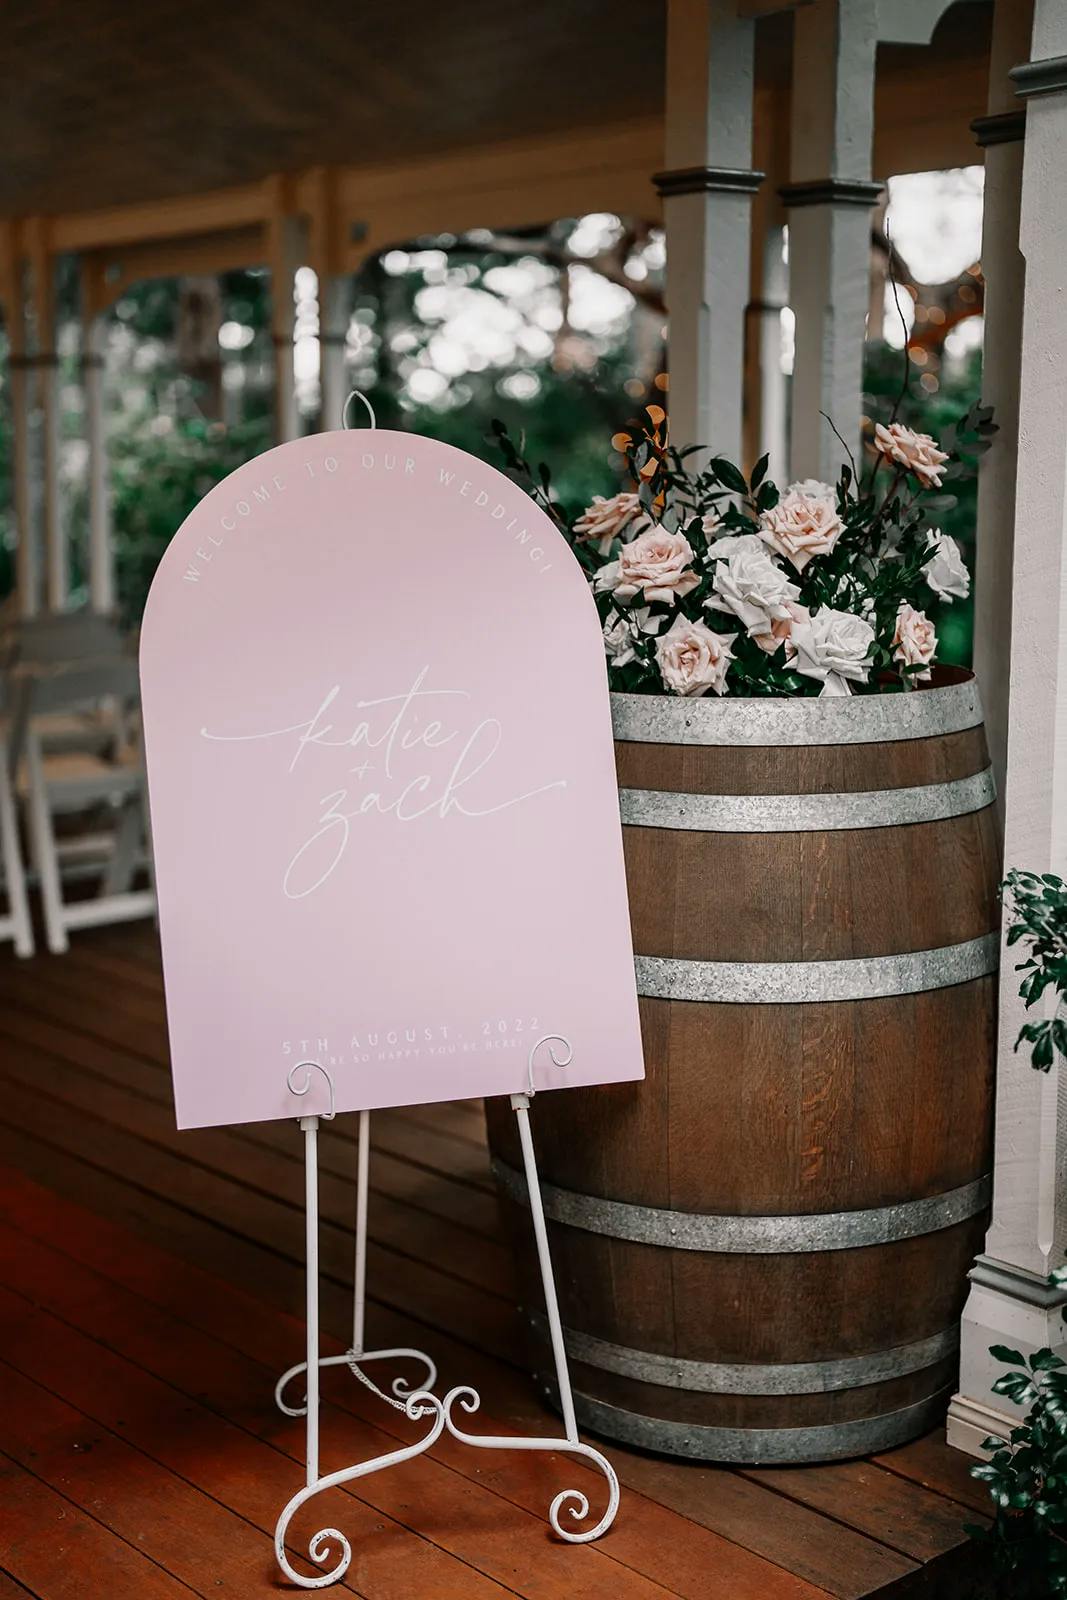 Welcome sign with wine barrel and flowers